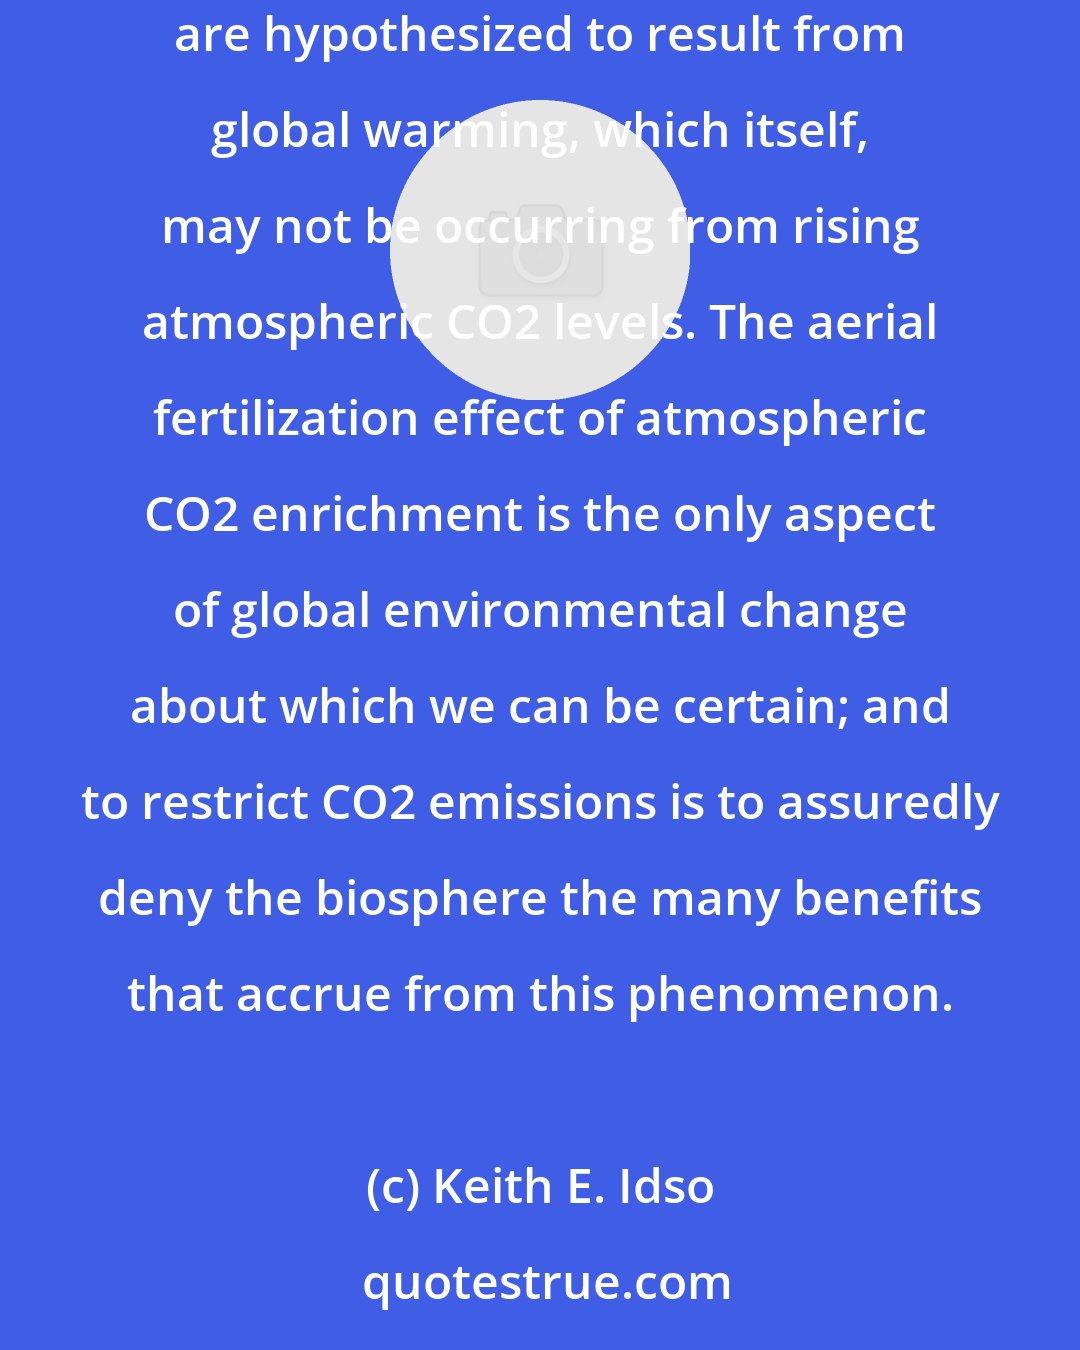 Keith E. Idso: These proven positive consequences of elevated CO2 are infinitely more important than the unsubstantiated predictions of apocalypse that are hypothesized to result from global warming, which itself, may not be occurring from rising atmospheric CO2 levels. The aerial fertilization effect of atmospheric CO2 enrichment is the only aspect of global environmental change about which we can be certain; and to restrict CO2 emissions is to assuredly deny the biosphere the many benefits that accrue from this phenomenon.